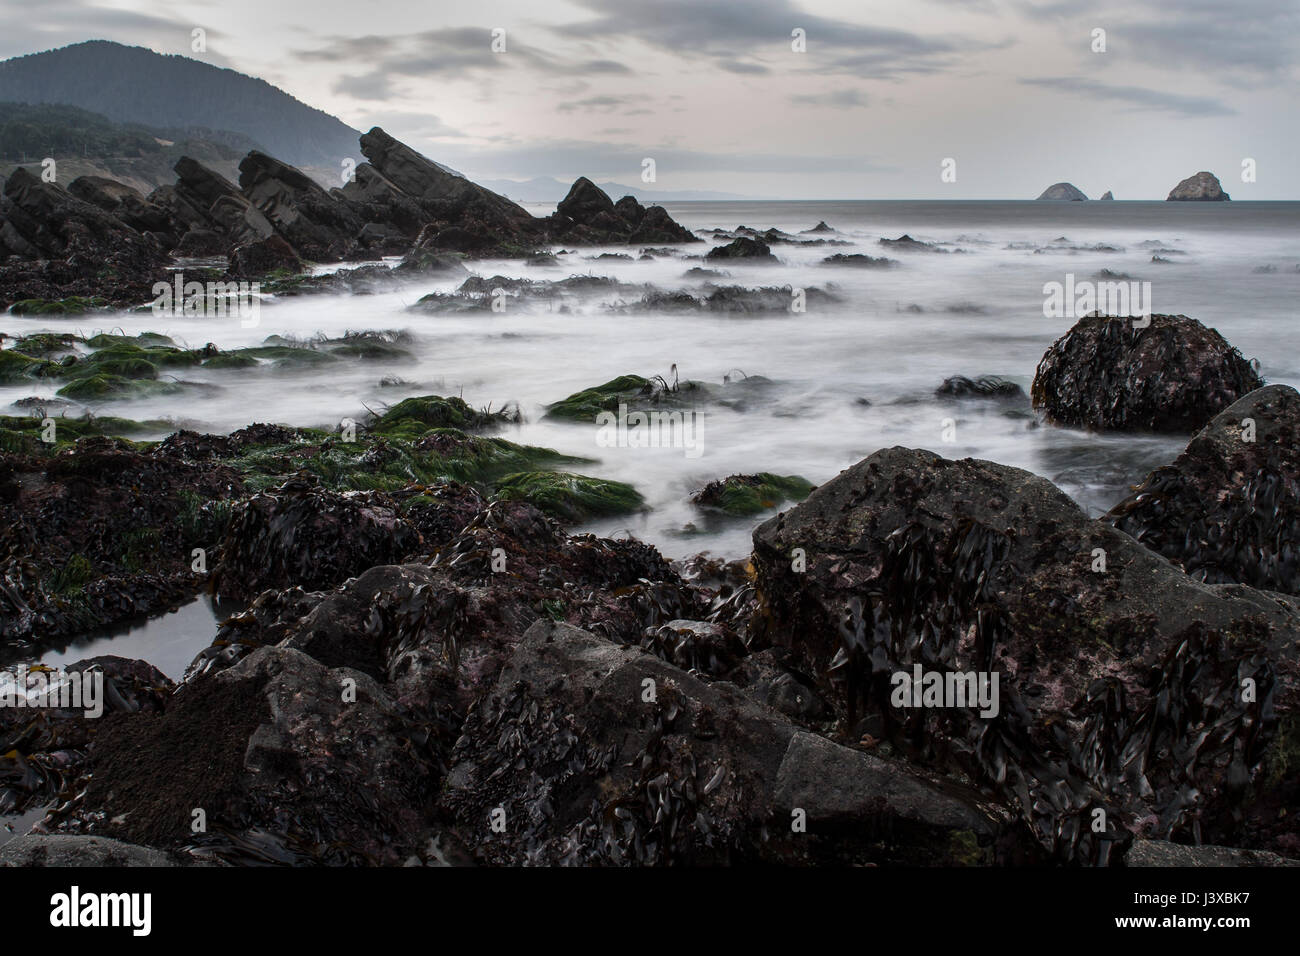 Long exposure blurs the incoming waves of an extreme low tide in the early morning on the Oregon coast, USA. Stock Photo